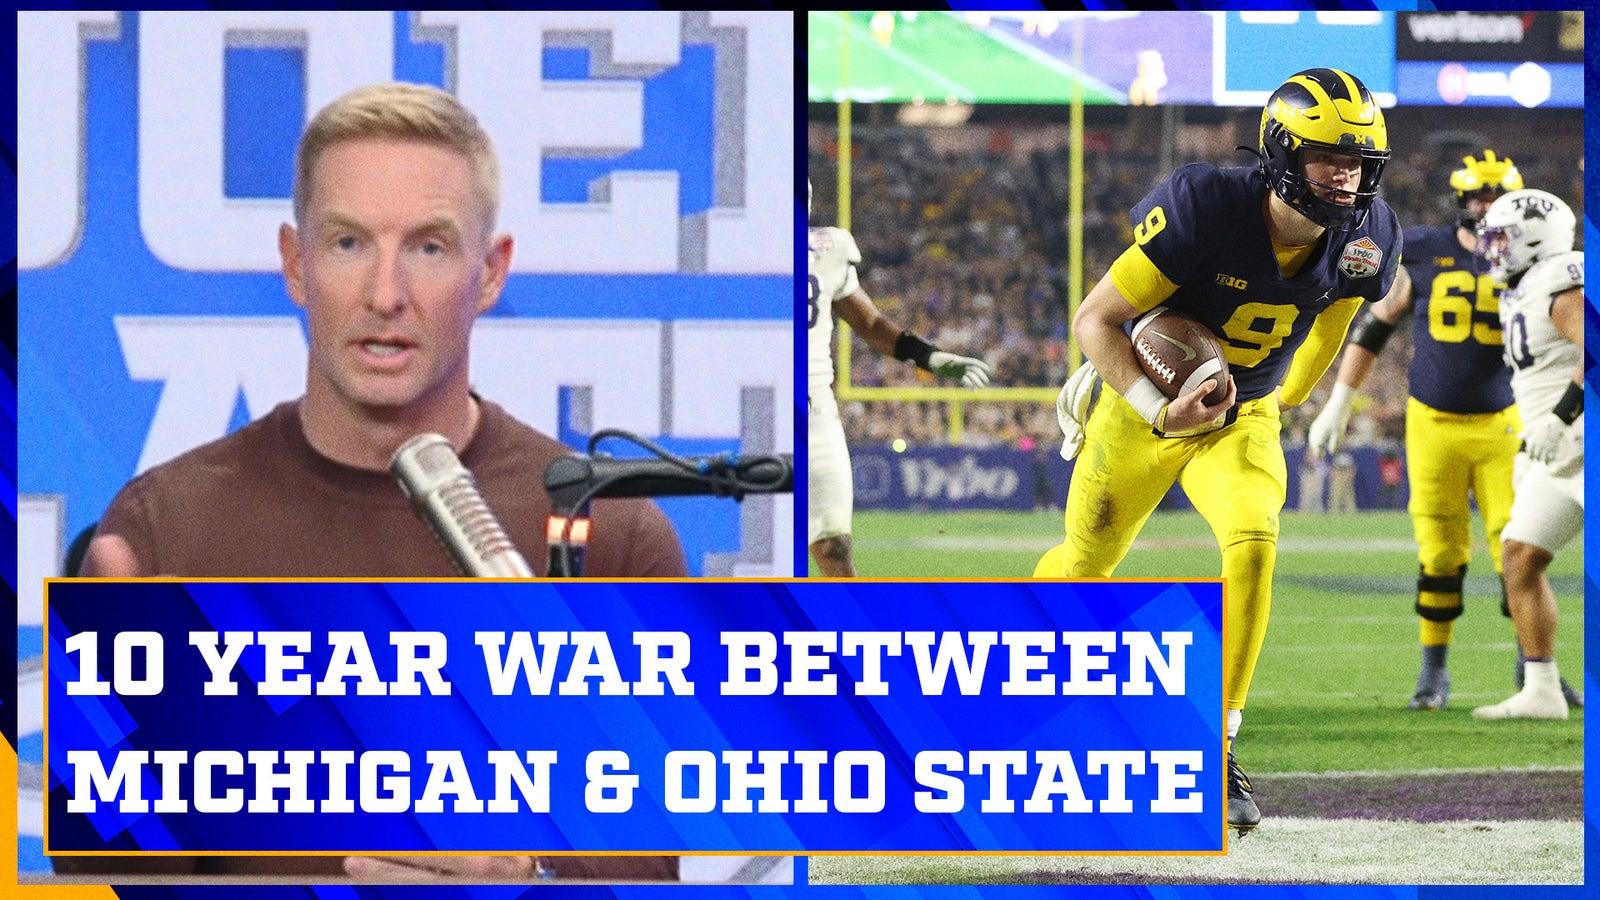 Michigan and Ohio State aren't going anywhere